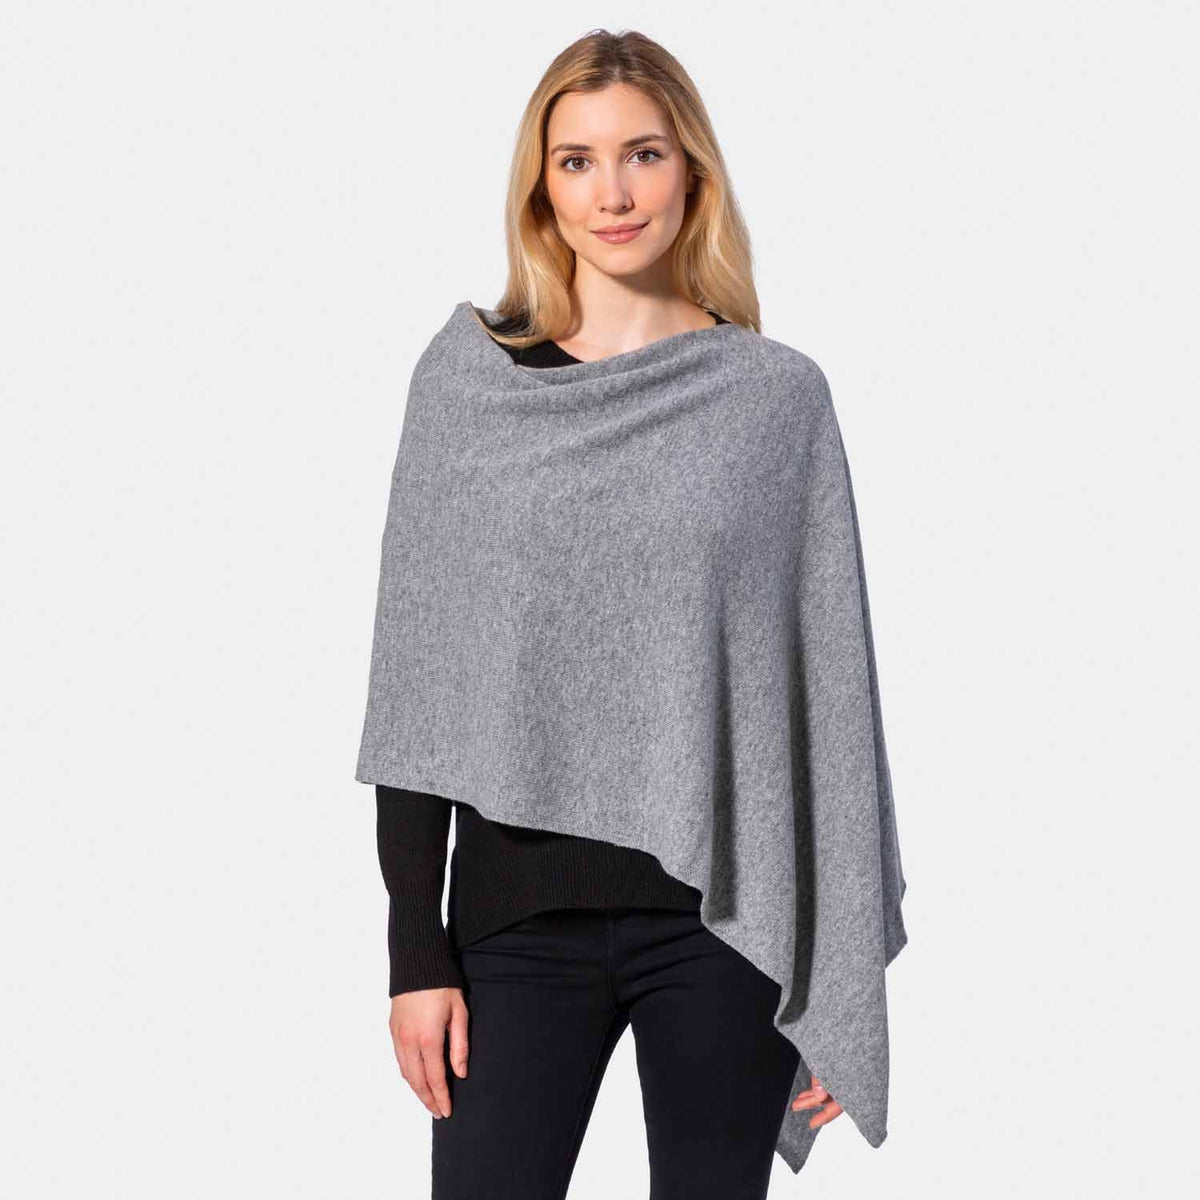 Picture of a woman wearing an asymmetrical ove the head poncho, grey.